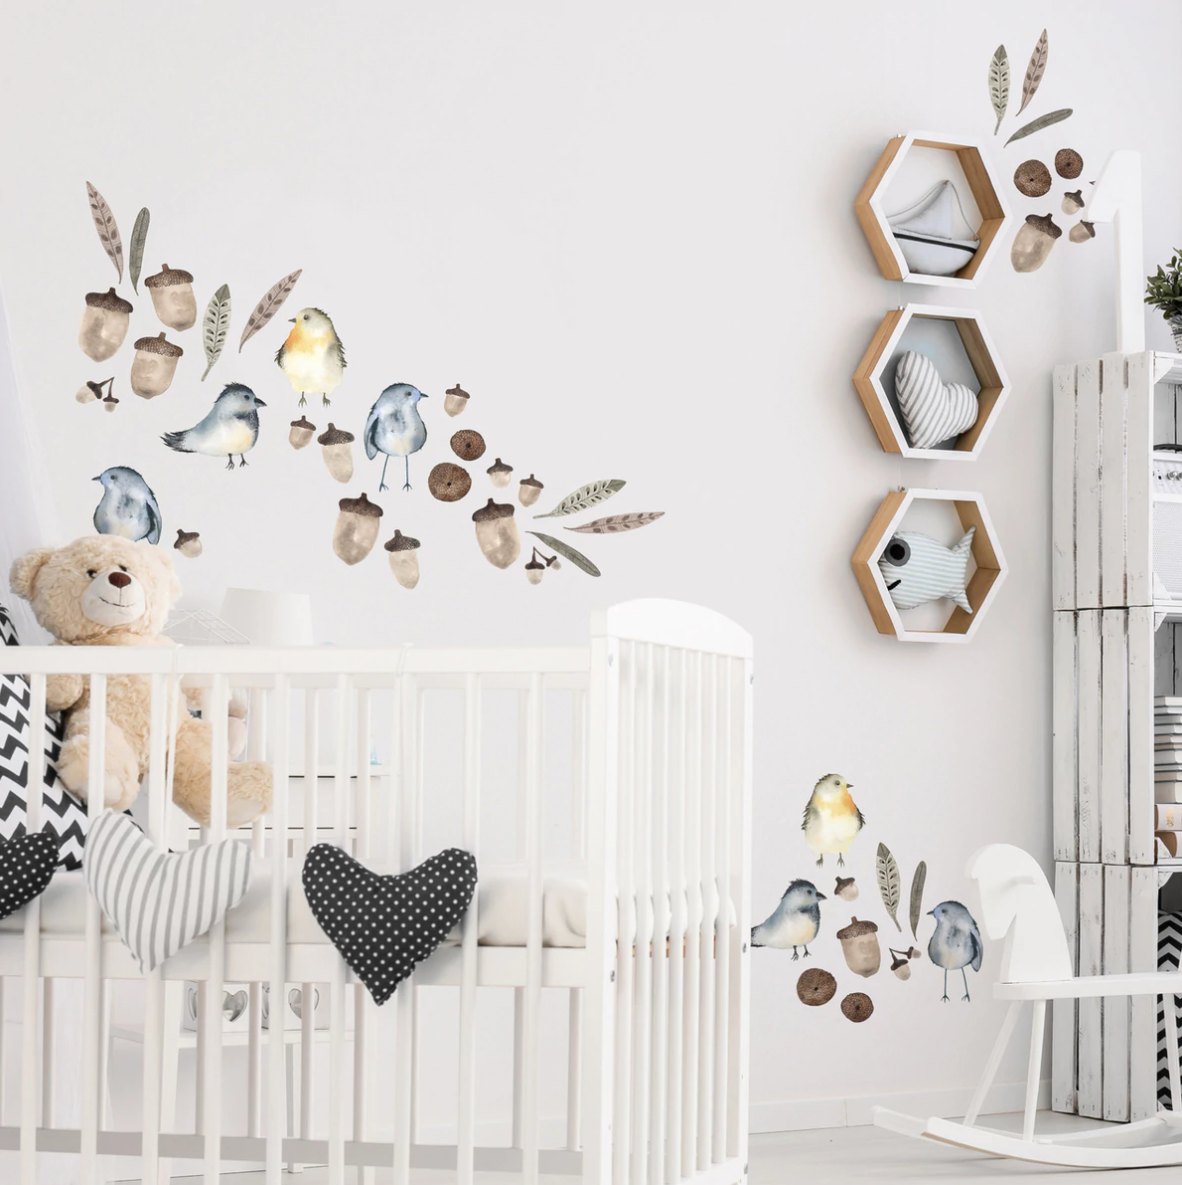 5 Quick Ways to Refresh the Nursery for Spring